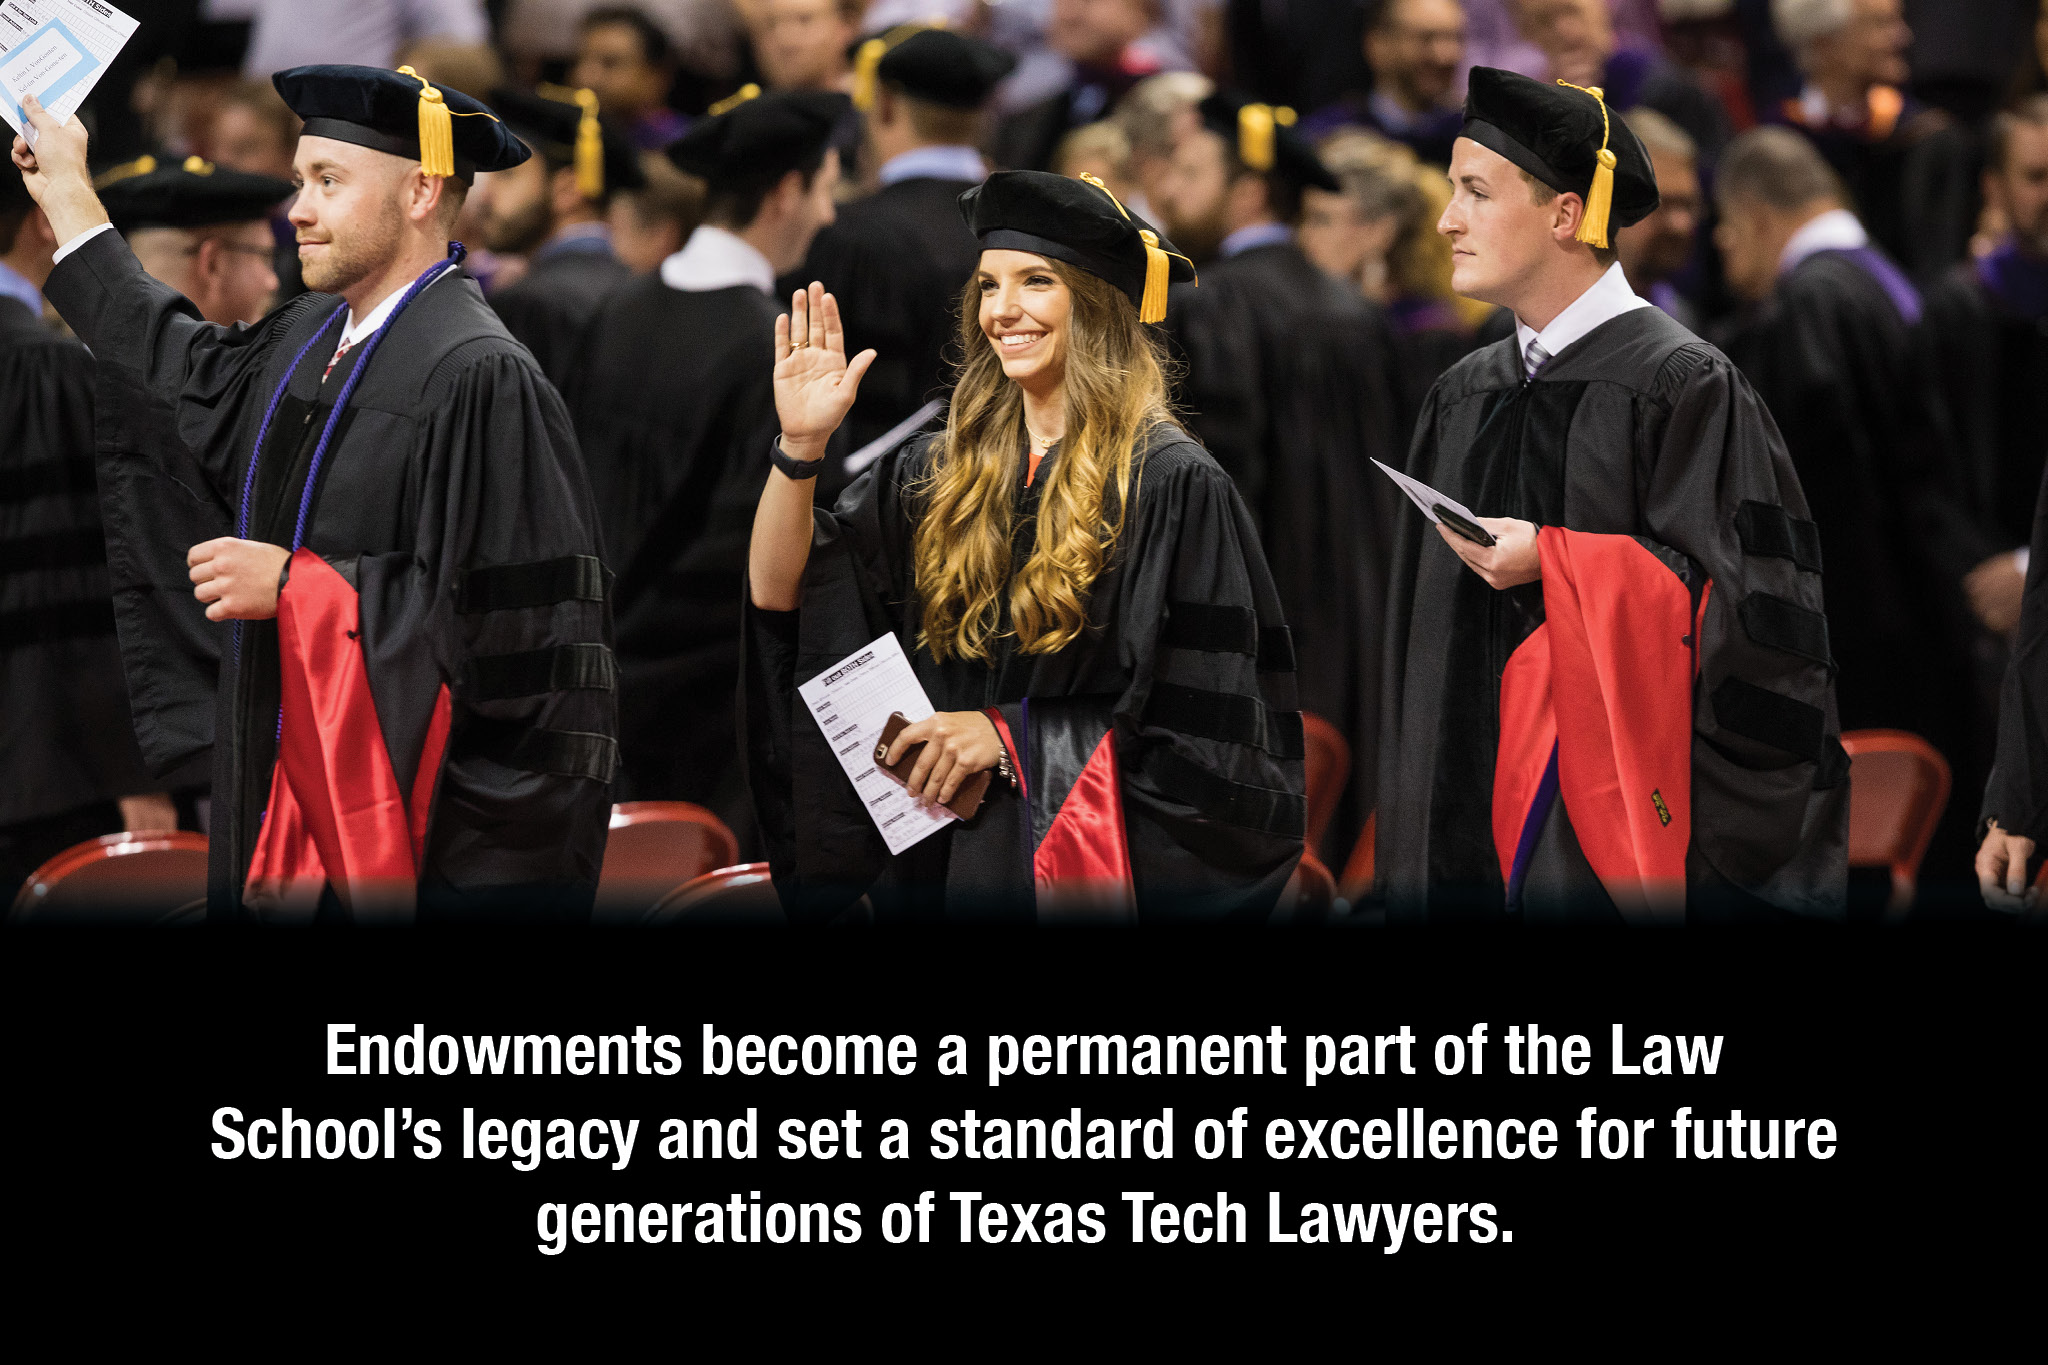 Endowments become a permanent part of the Law School's legacy and set a standard of excellence for future generations of Texas Tech Lawyers.